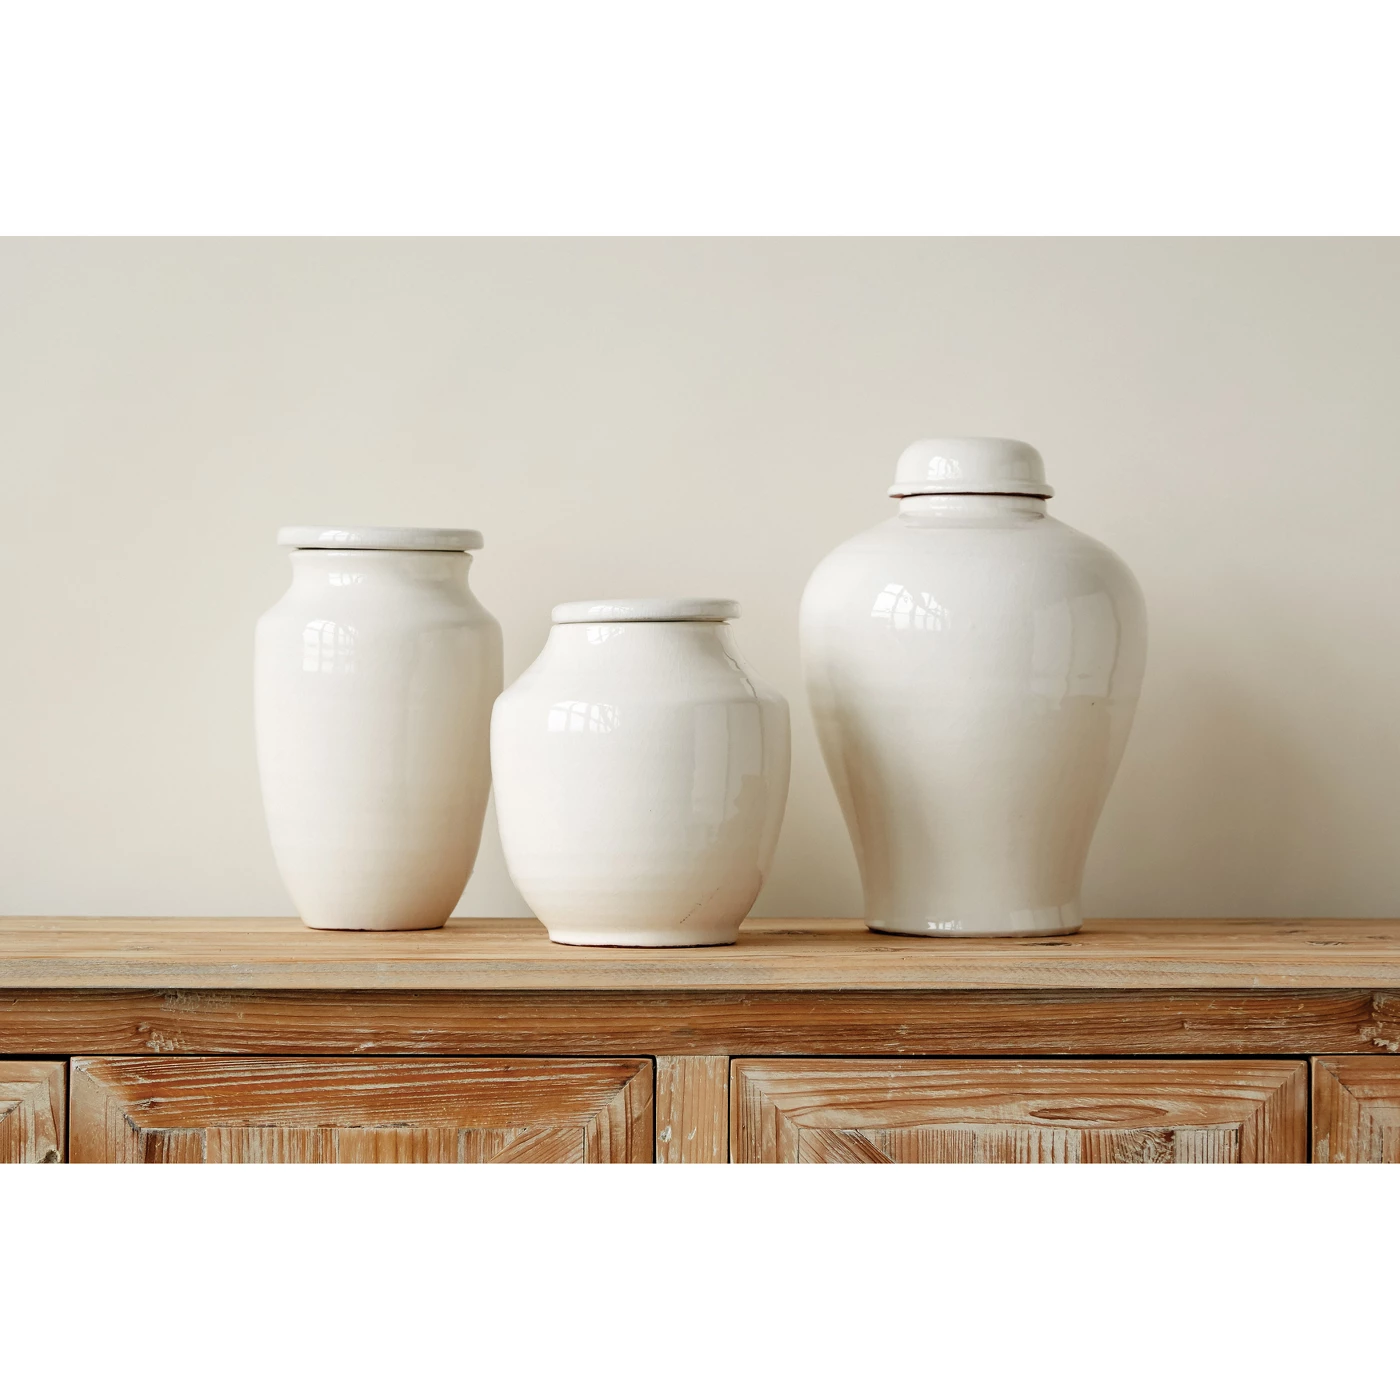 Terracotta Cachepots. Hello Lovely, White French Home Decor for Fans of Country Interiors.